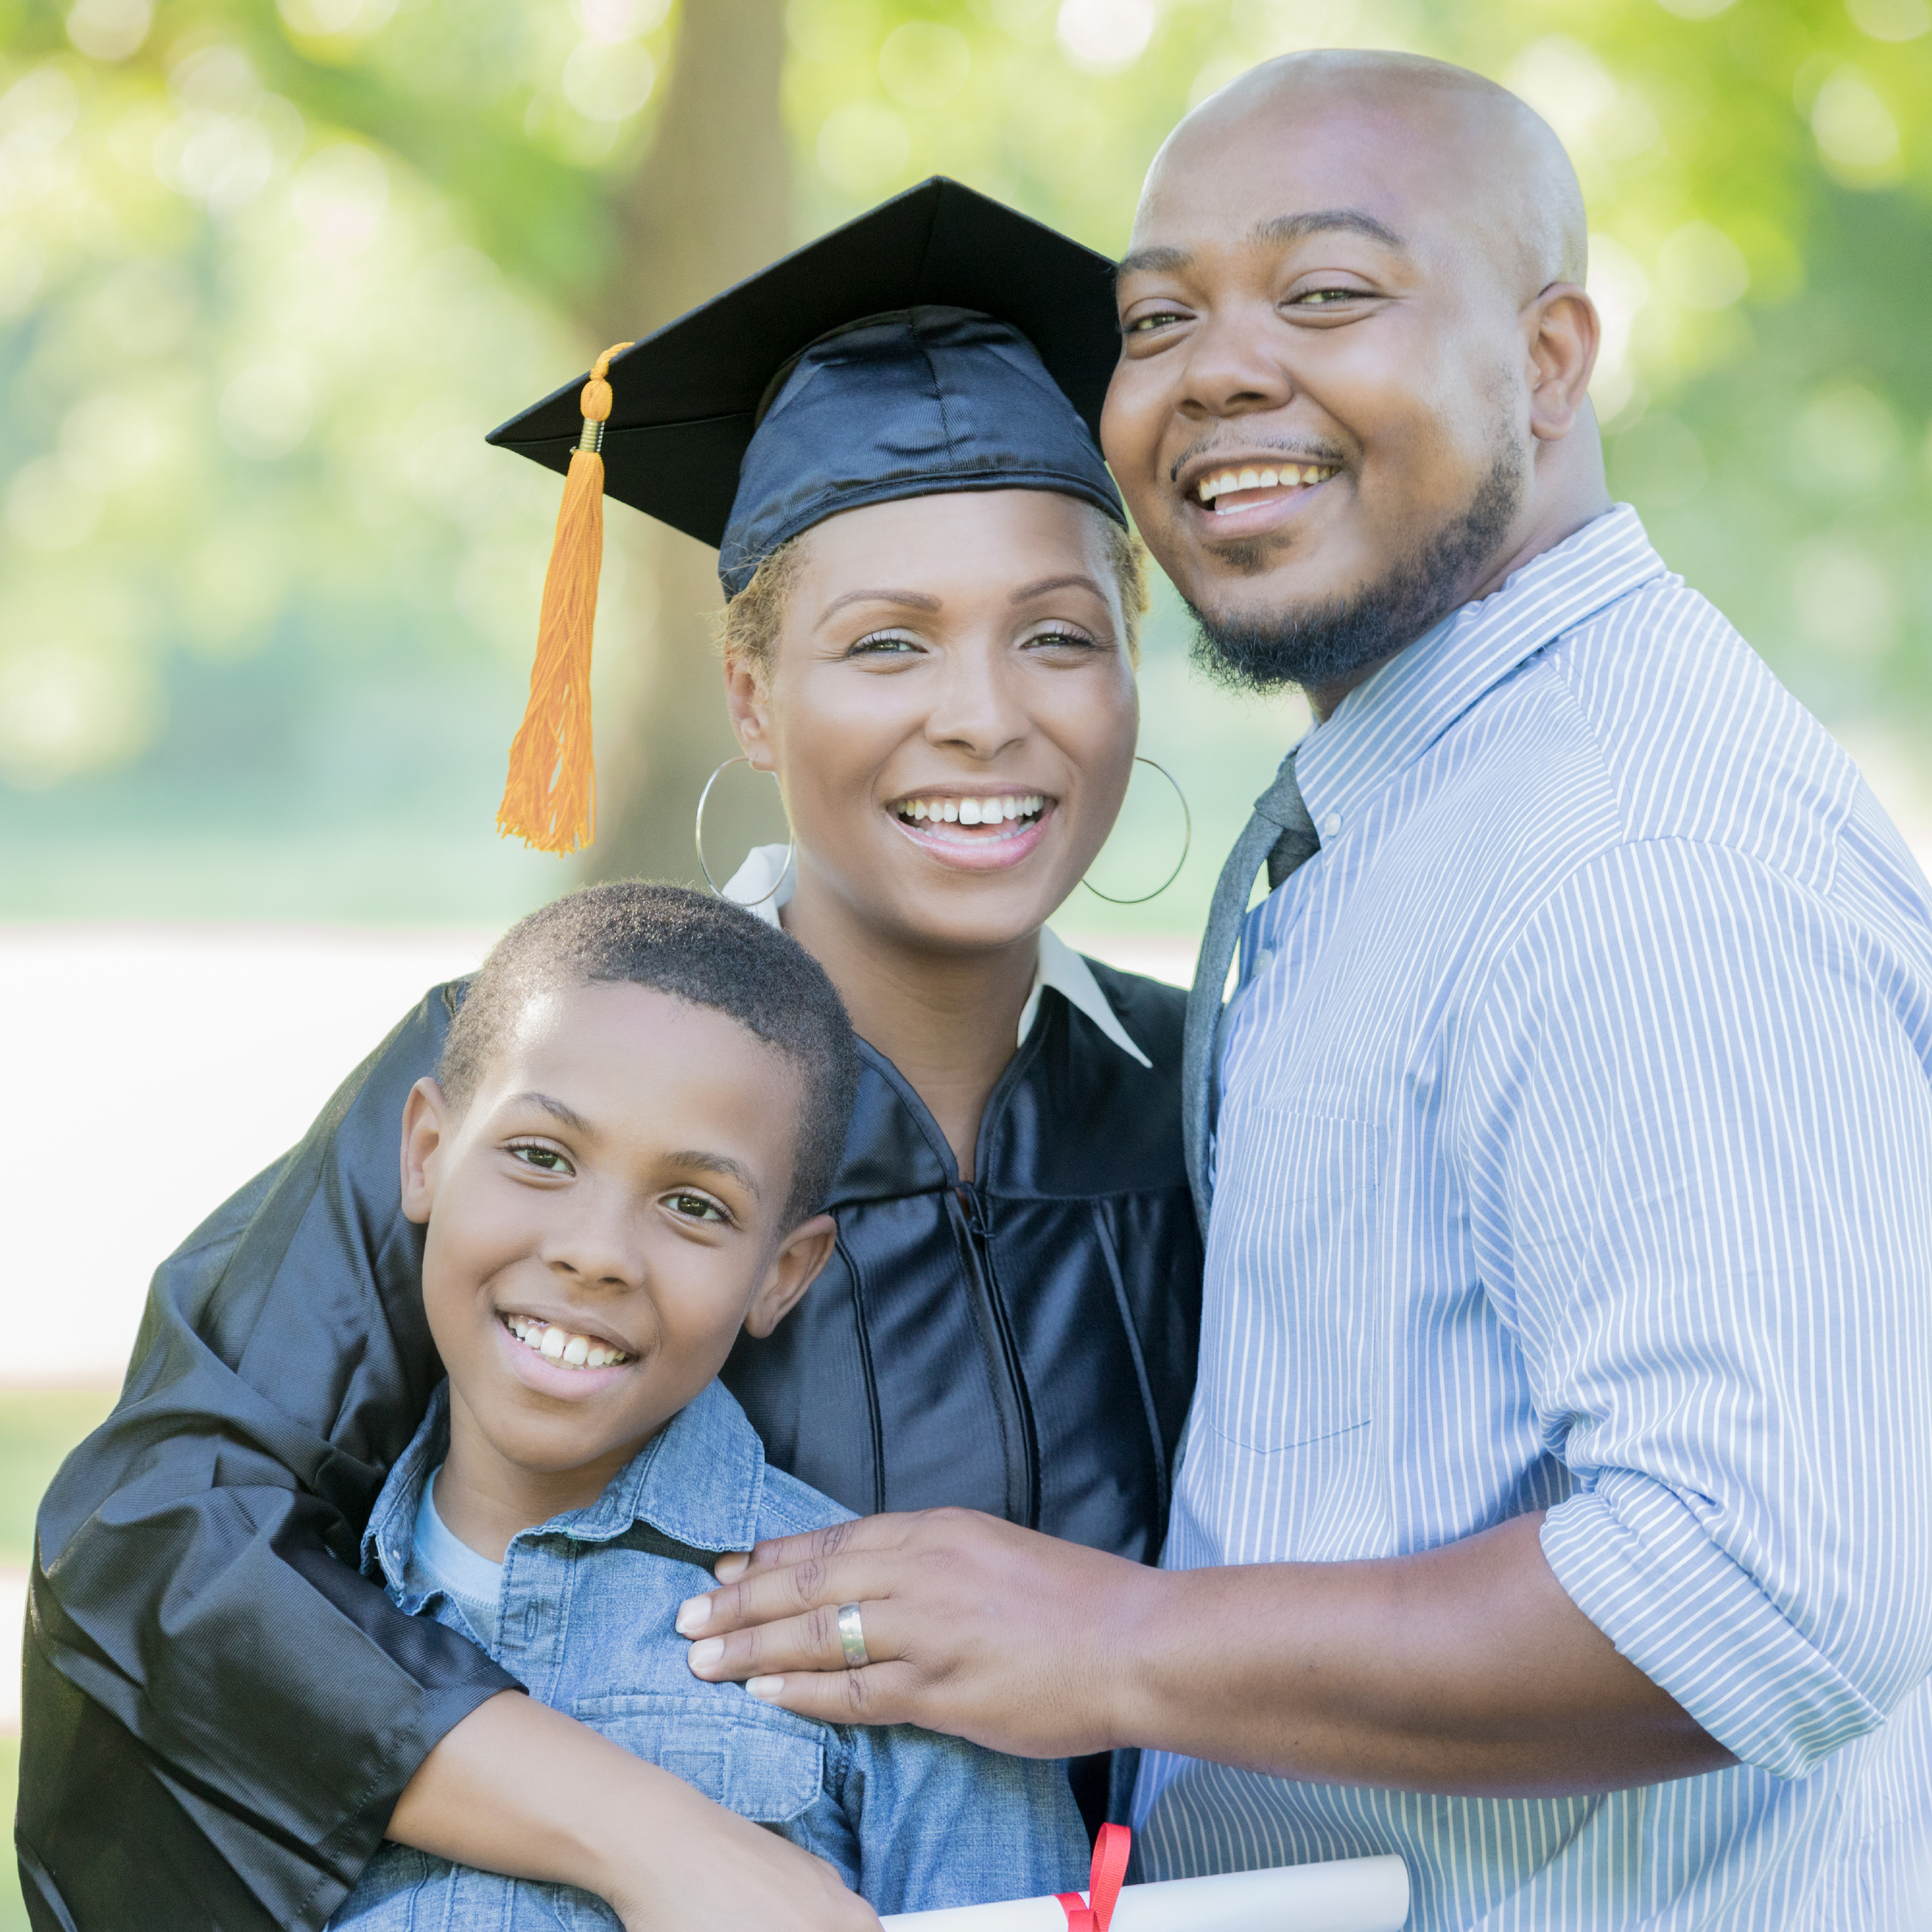 3 people at a graduation–2 adults and 1 child